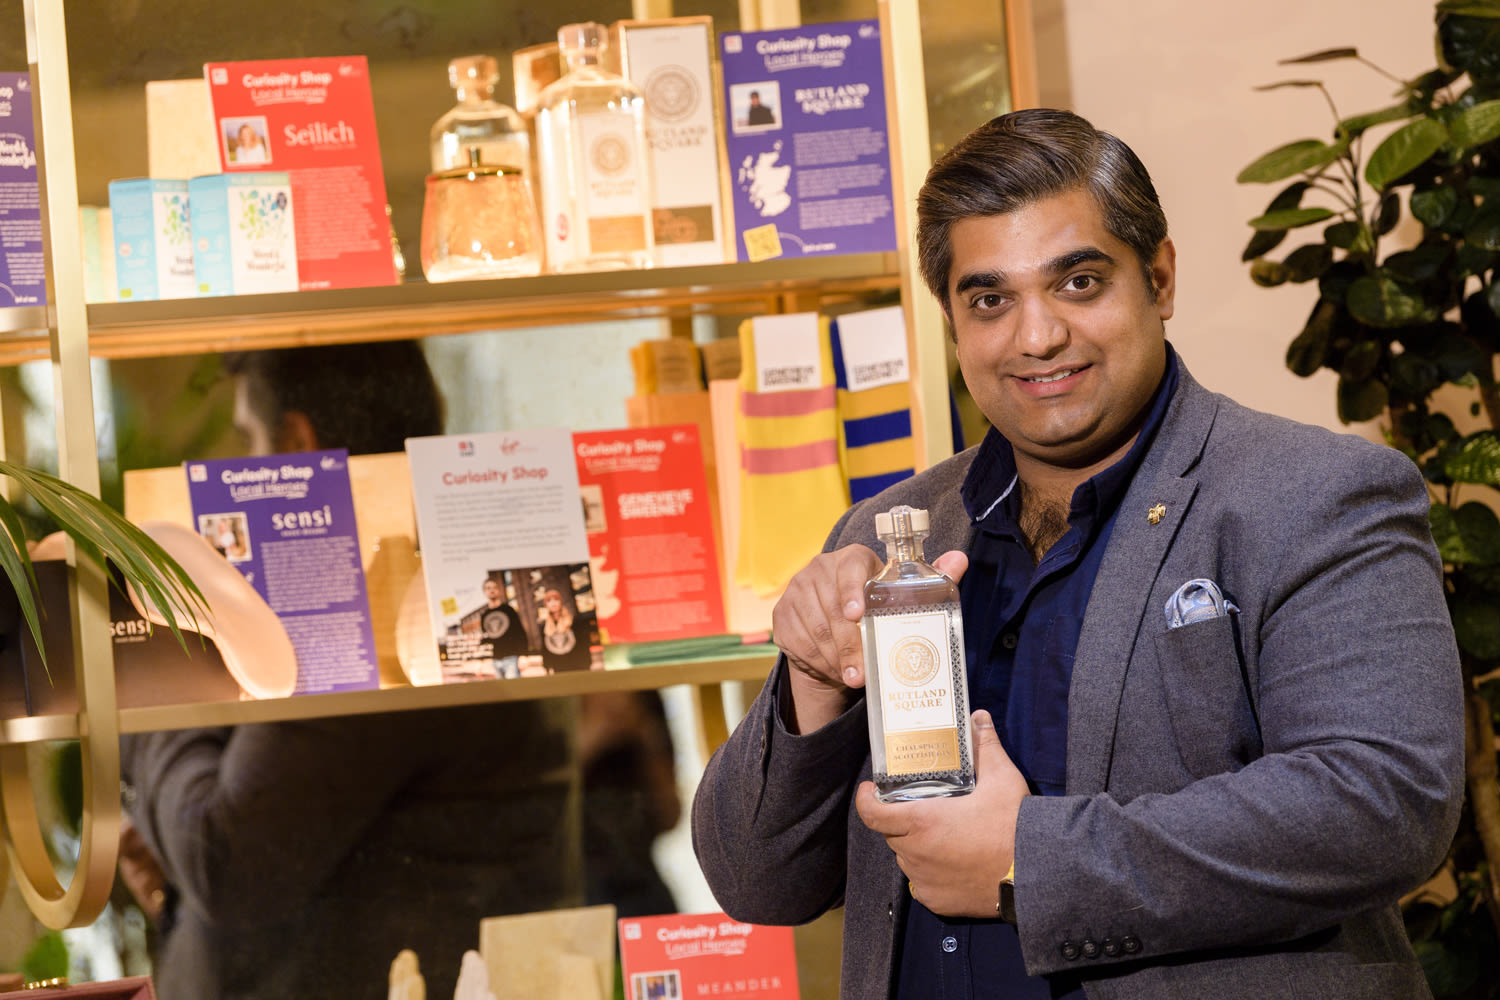 Nishant Sharma, founder of Rutland Square Gin, holding a bottle of gin next to The Curiosity Shop display